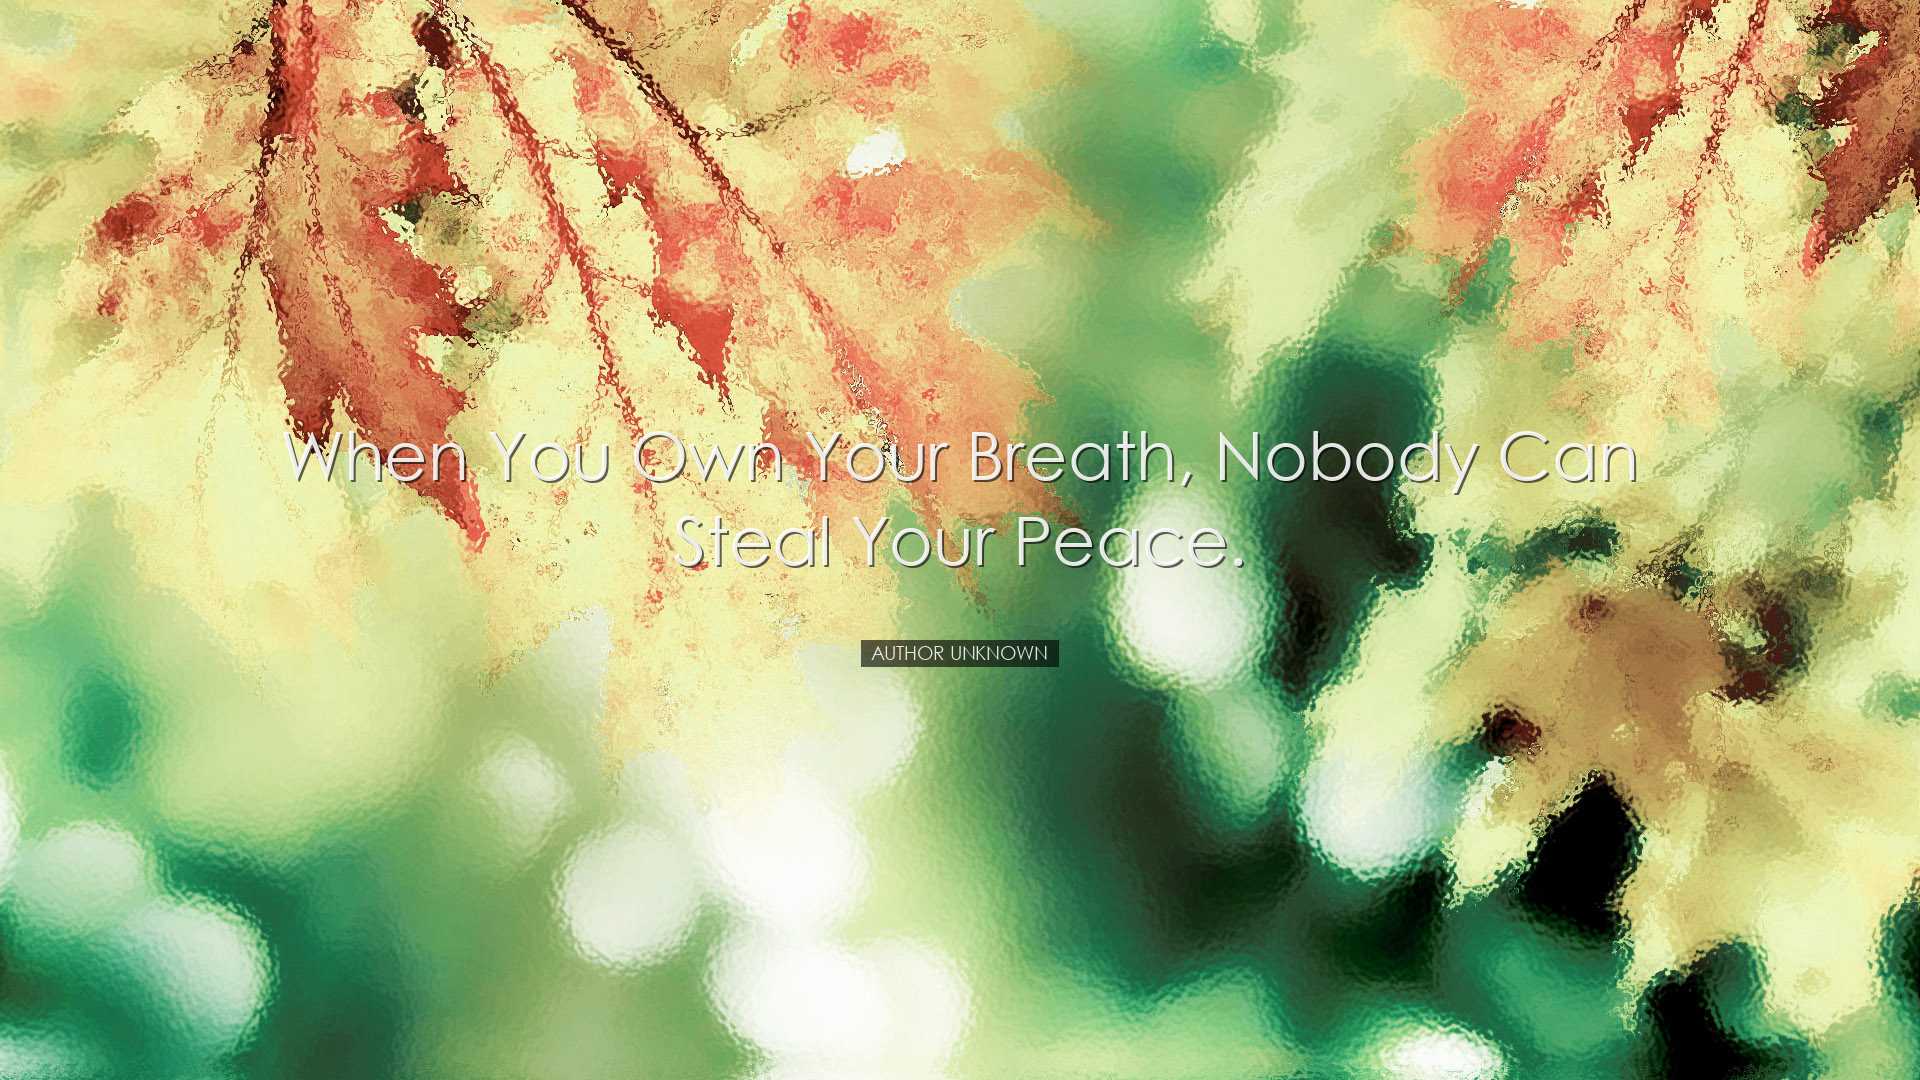 When you own your breath, nobody can steal your peace. - Author Un